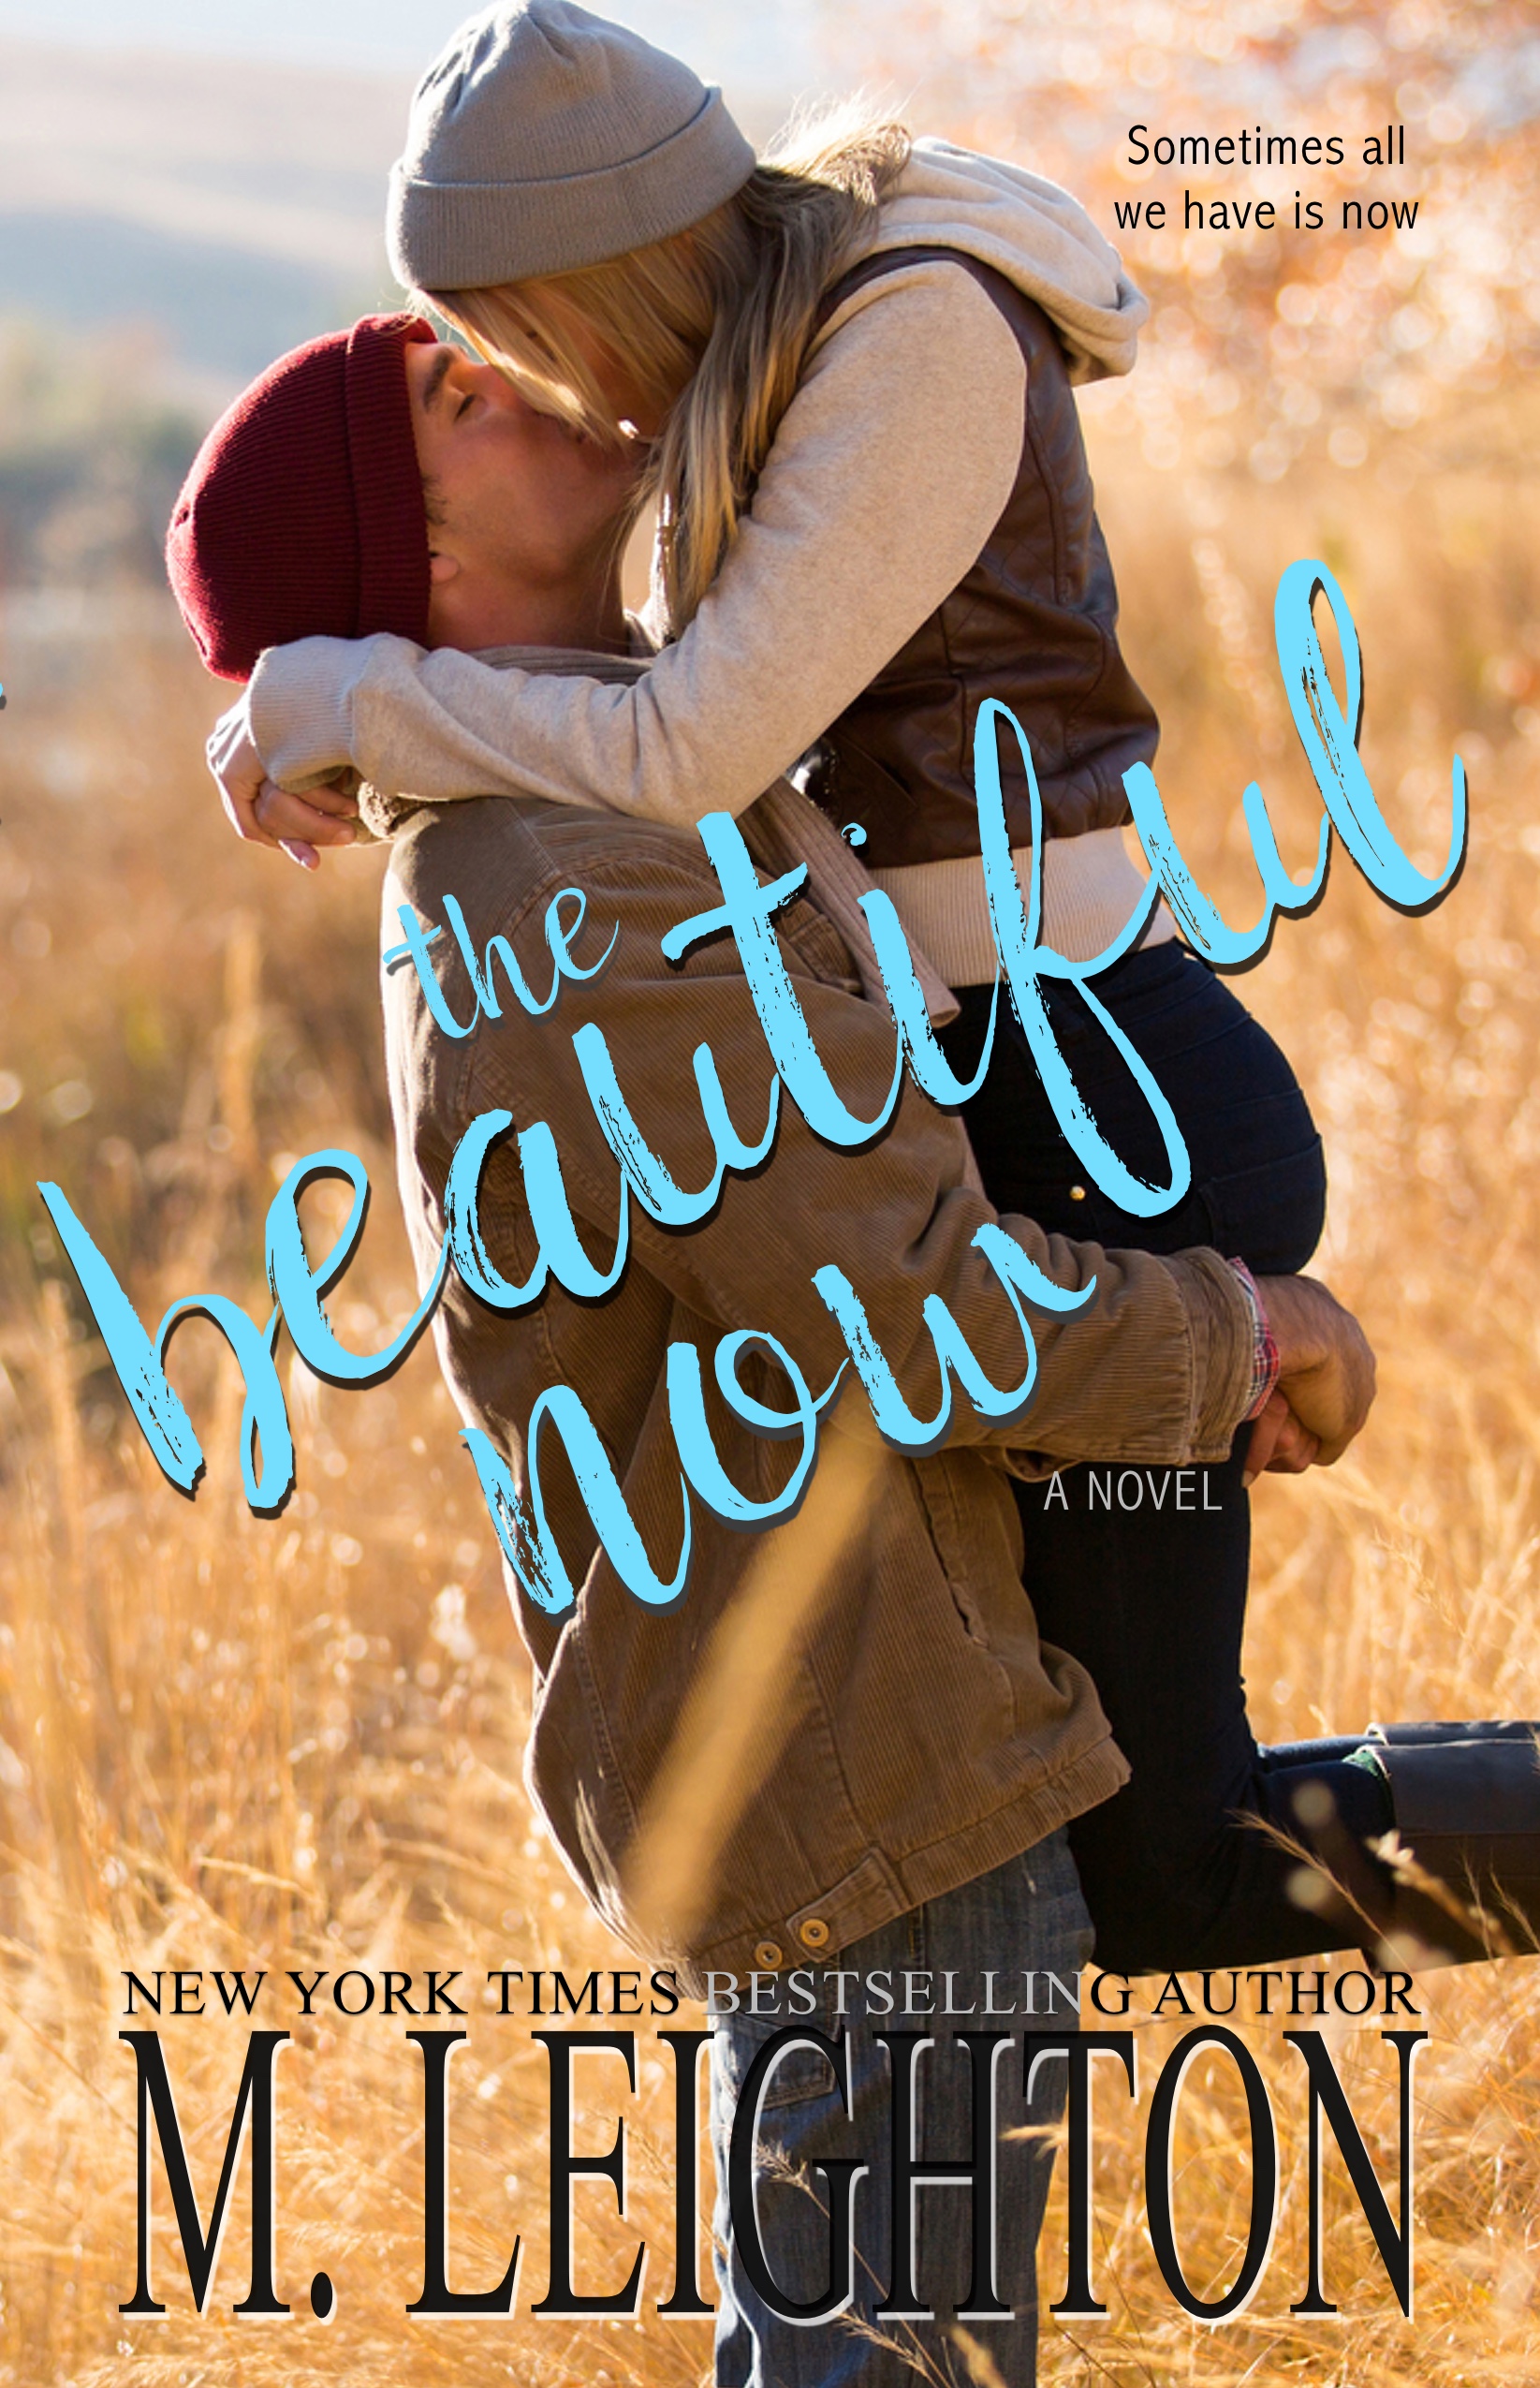 The Beautiful Now by M. Leighton Release Review